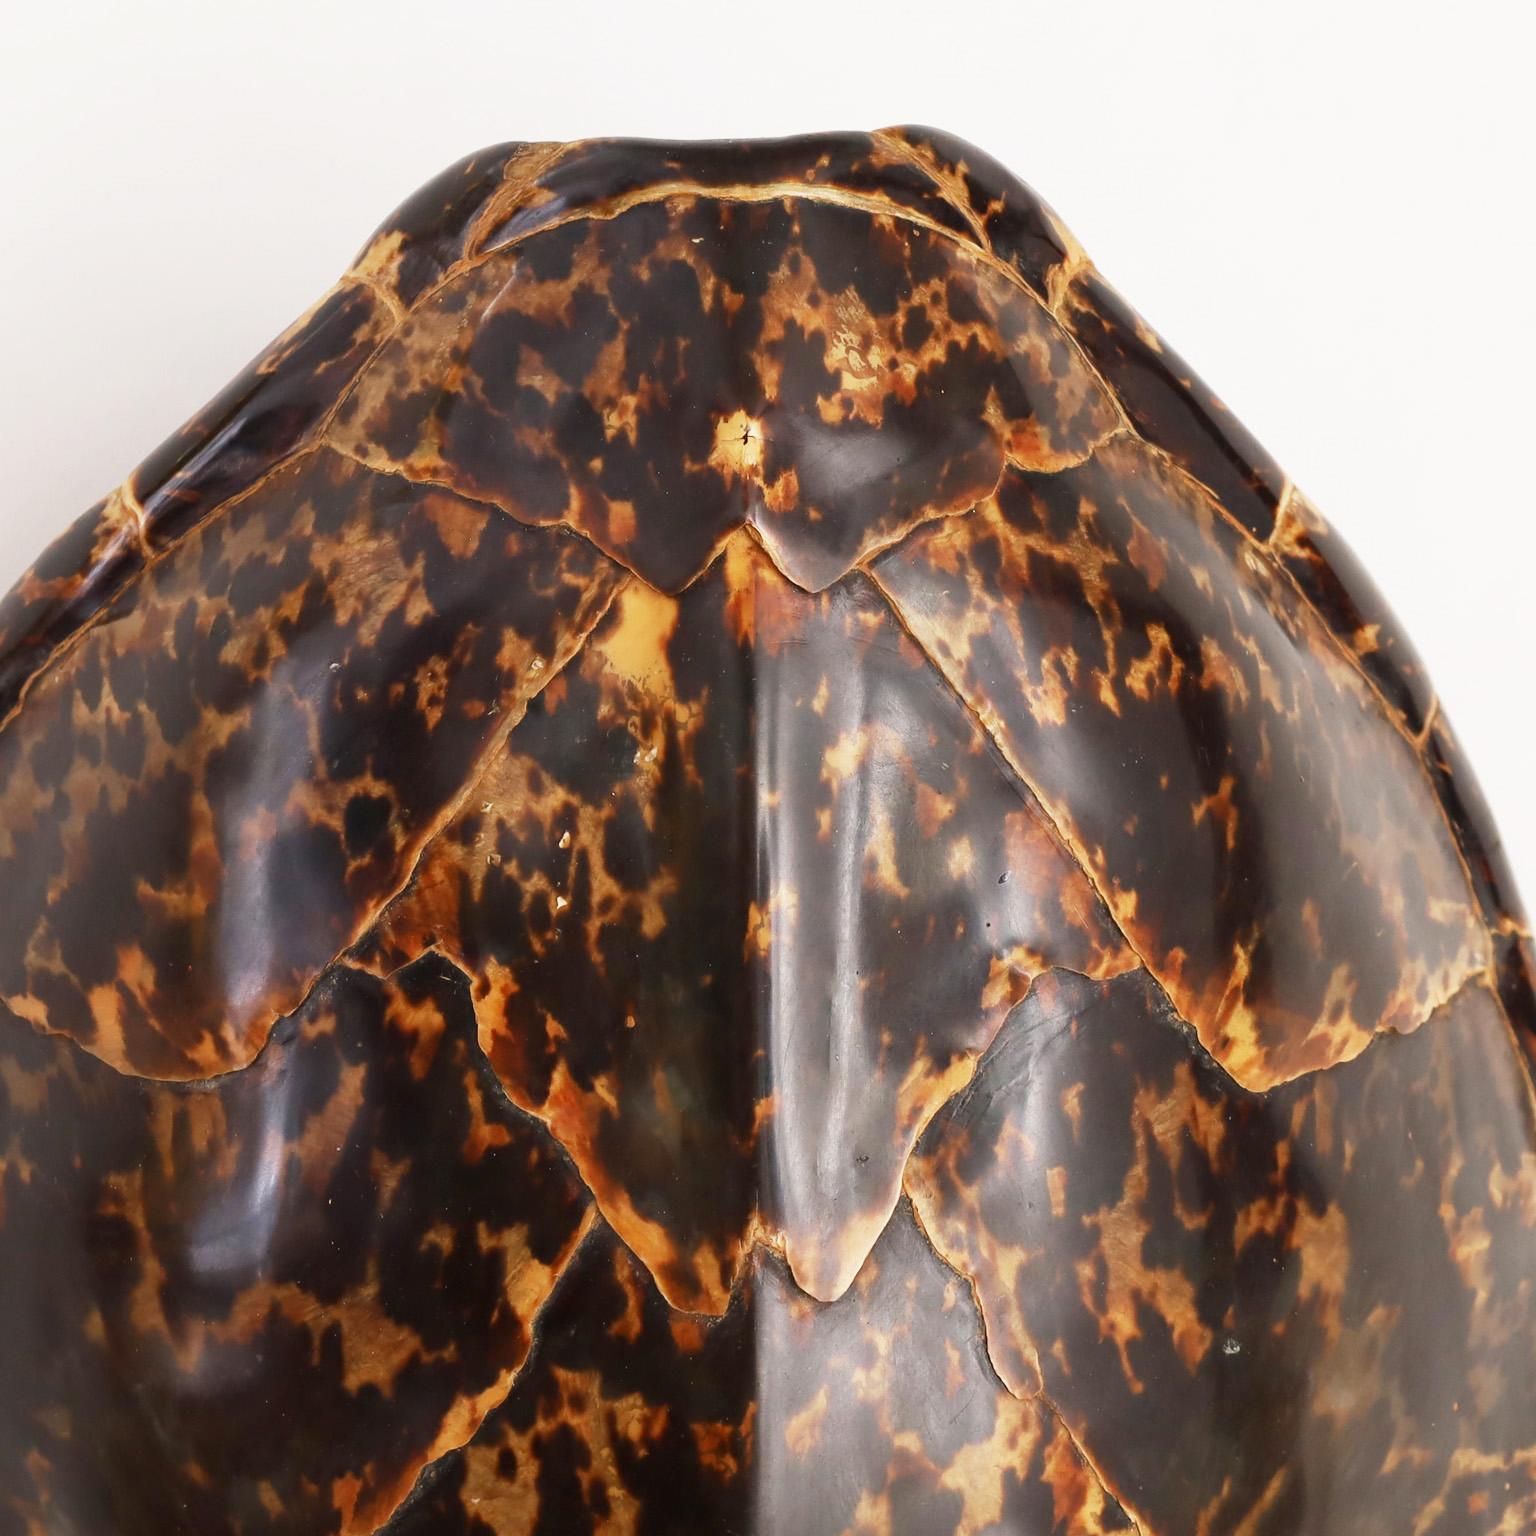 Rare antique Hawksbill turtle shell with a striking form and variegated natural organic tones. One of Mother nature's most iconic creations.